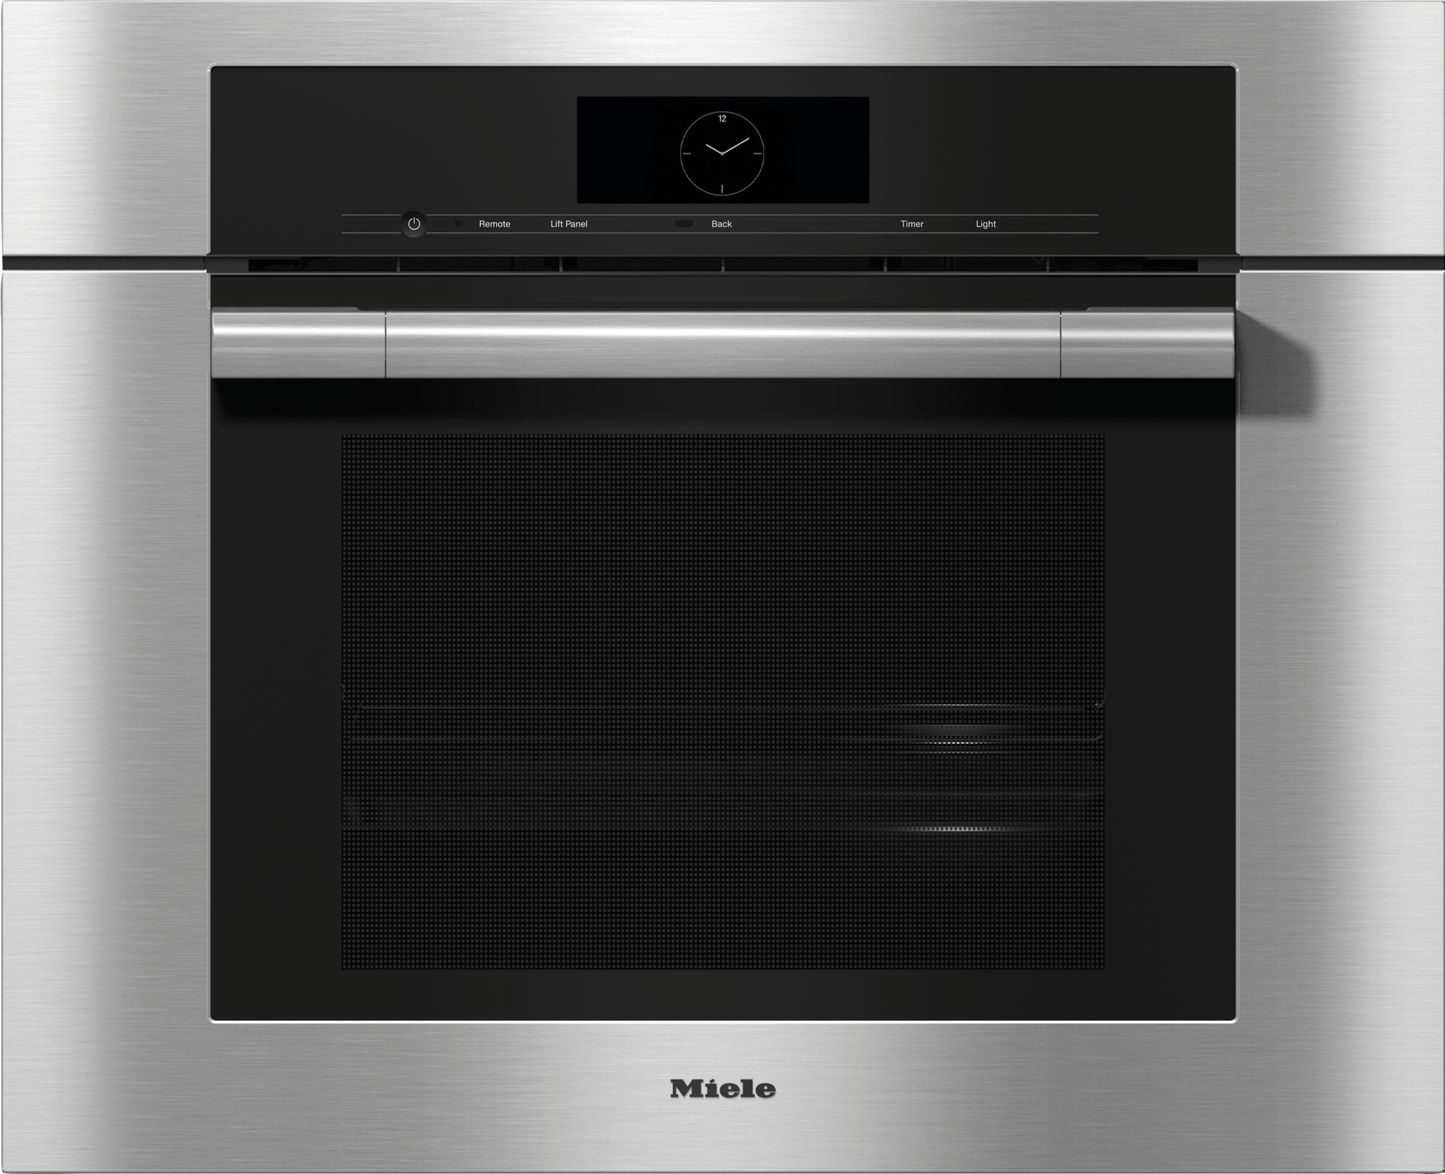 Miele DGC7780 STAINLESS STEEL  30" Combi-Steam Oven Xxl For Steam Cooking, Baking, Roasting With Roast Probe + Menu Cooking.